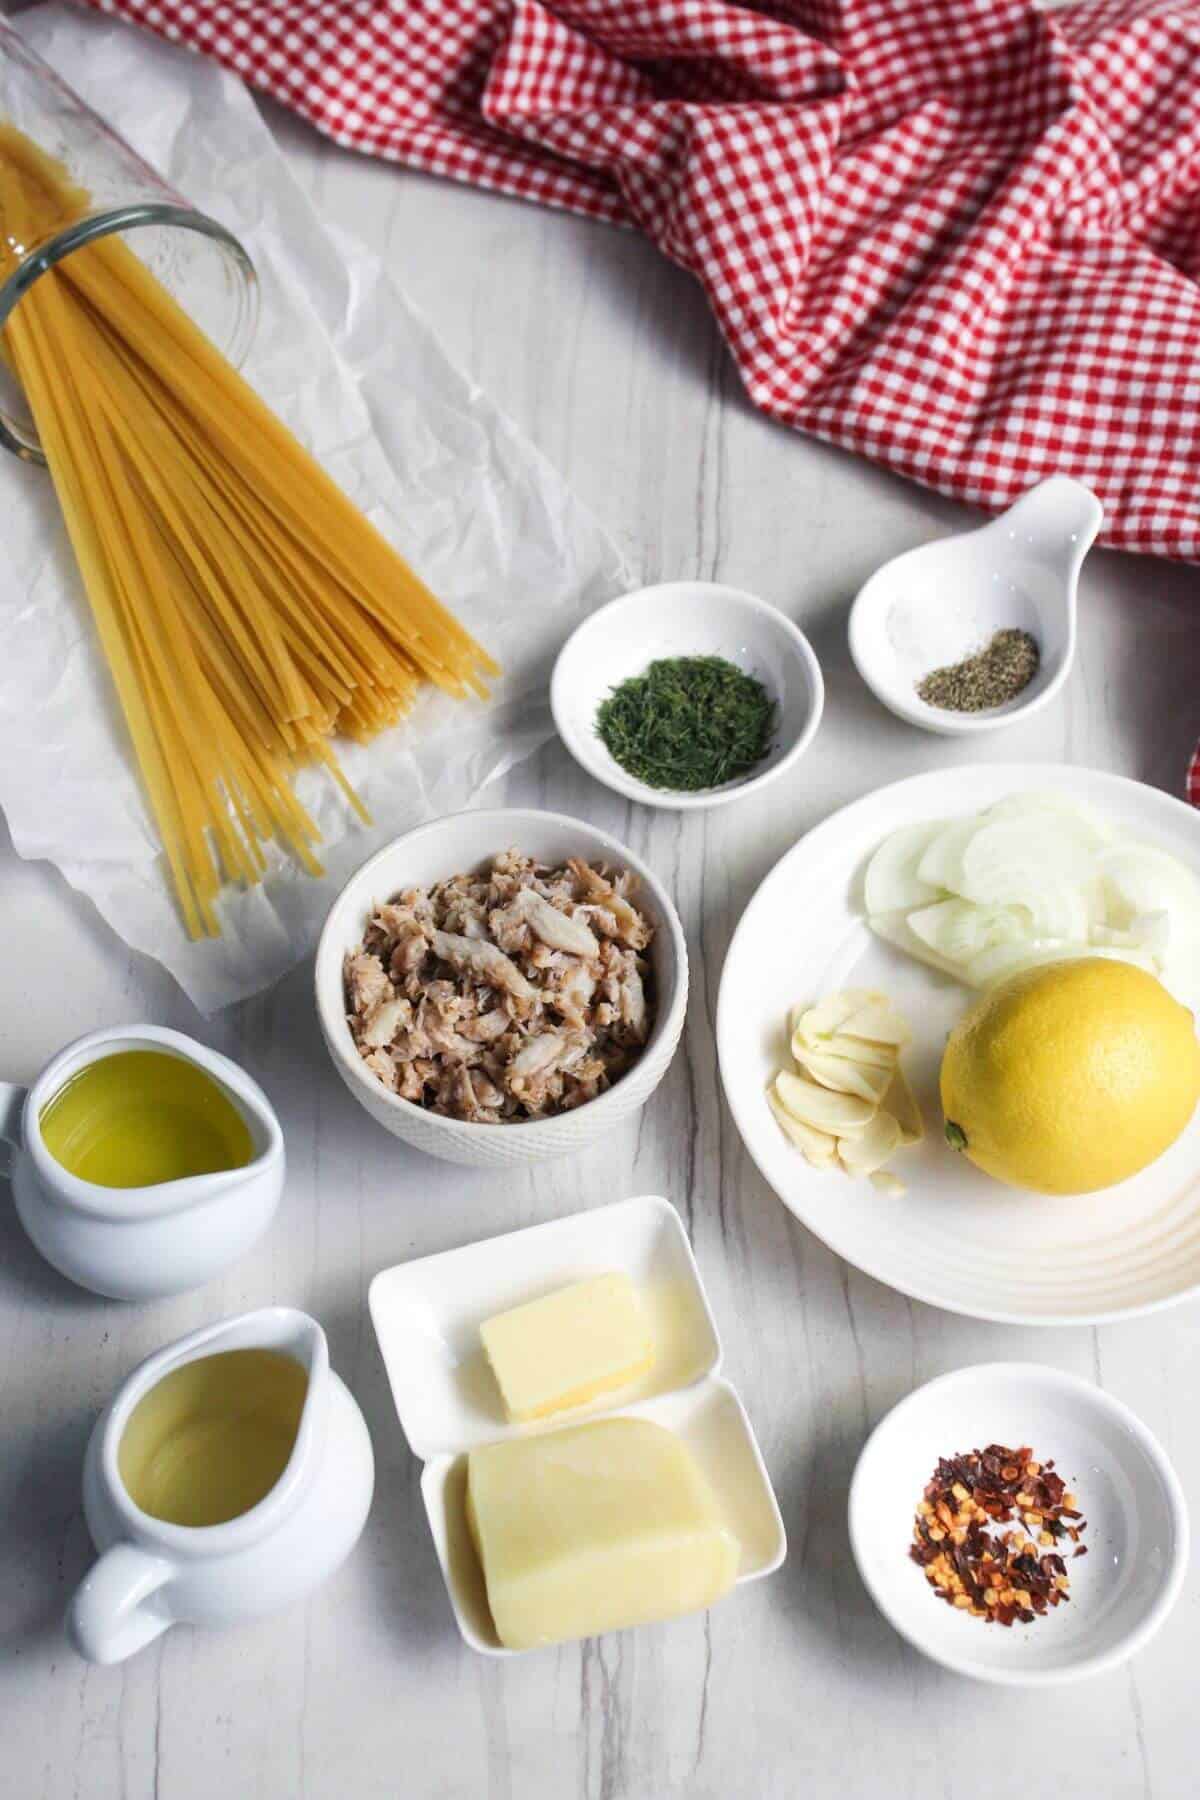 Ingredients for cooking arranged on a table, including crab, pasta, garlic, lemon, onions, butter, and spices.